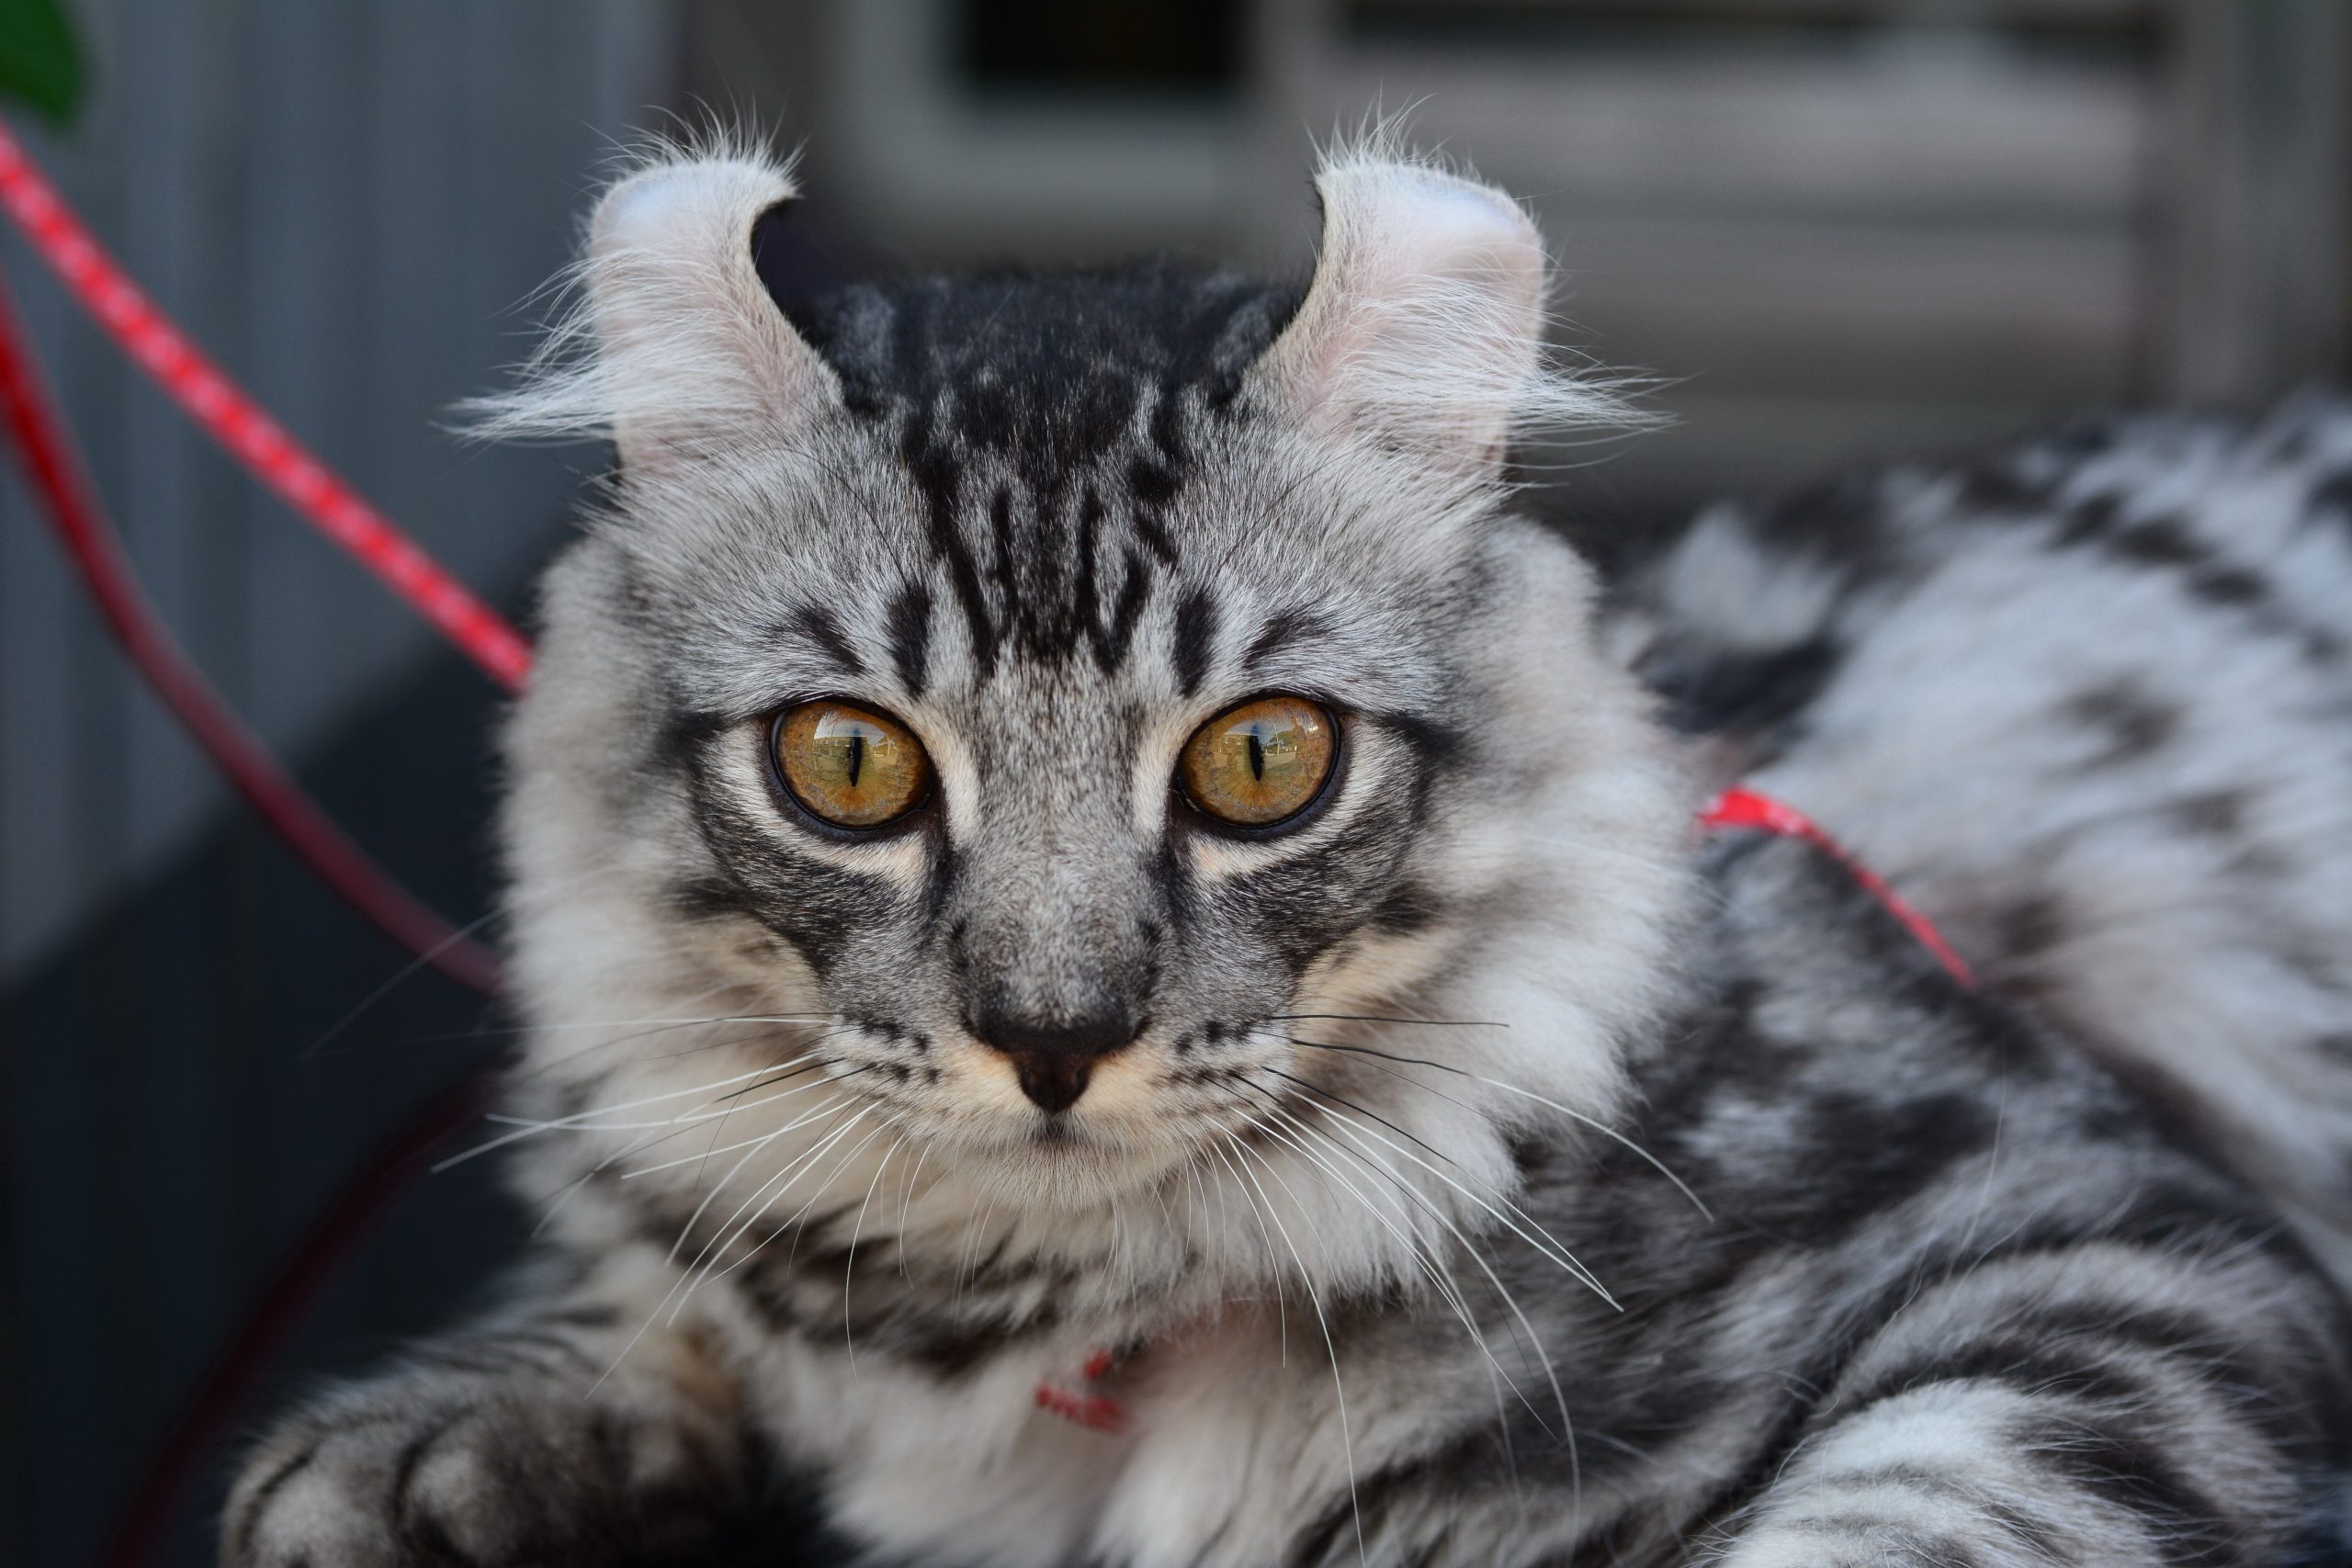 The Cutest Cat Breeds: 14 Cats You'll Definitely Want to Snuggle